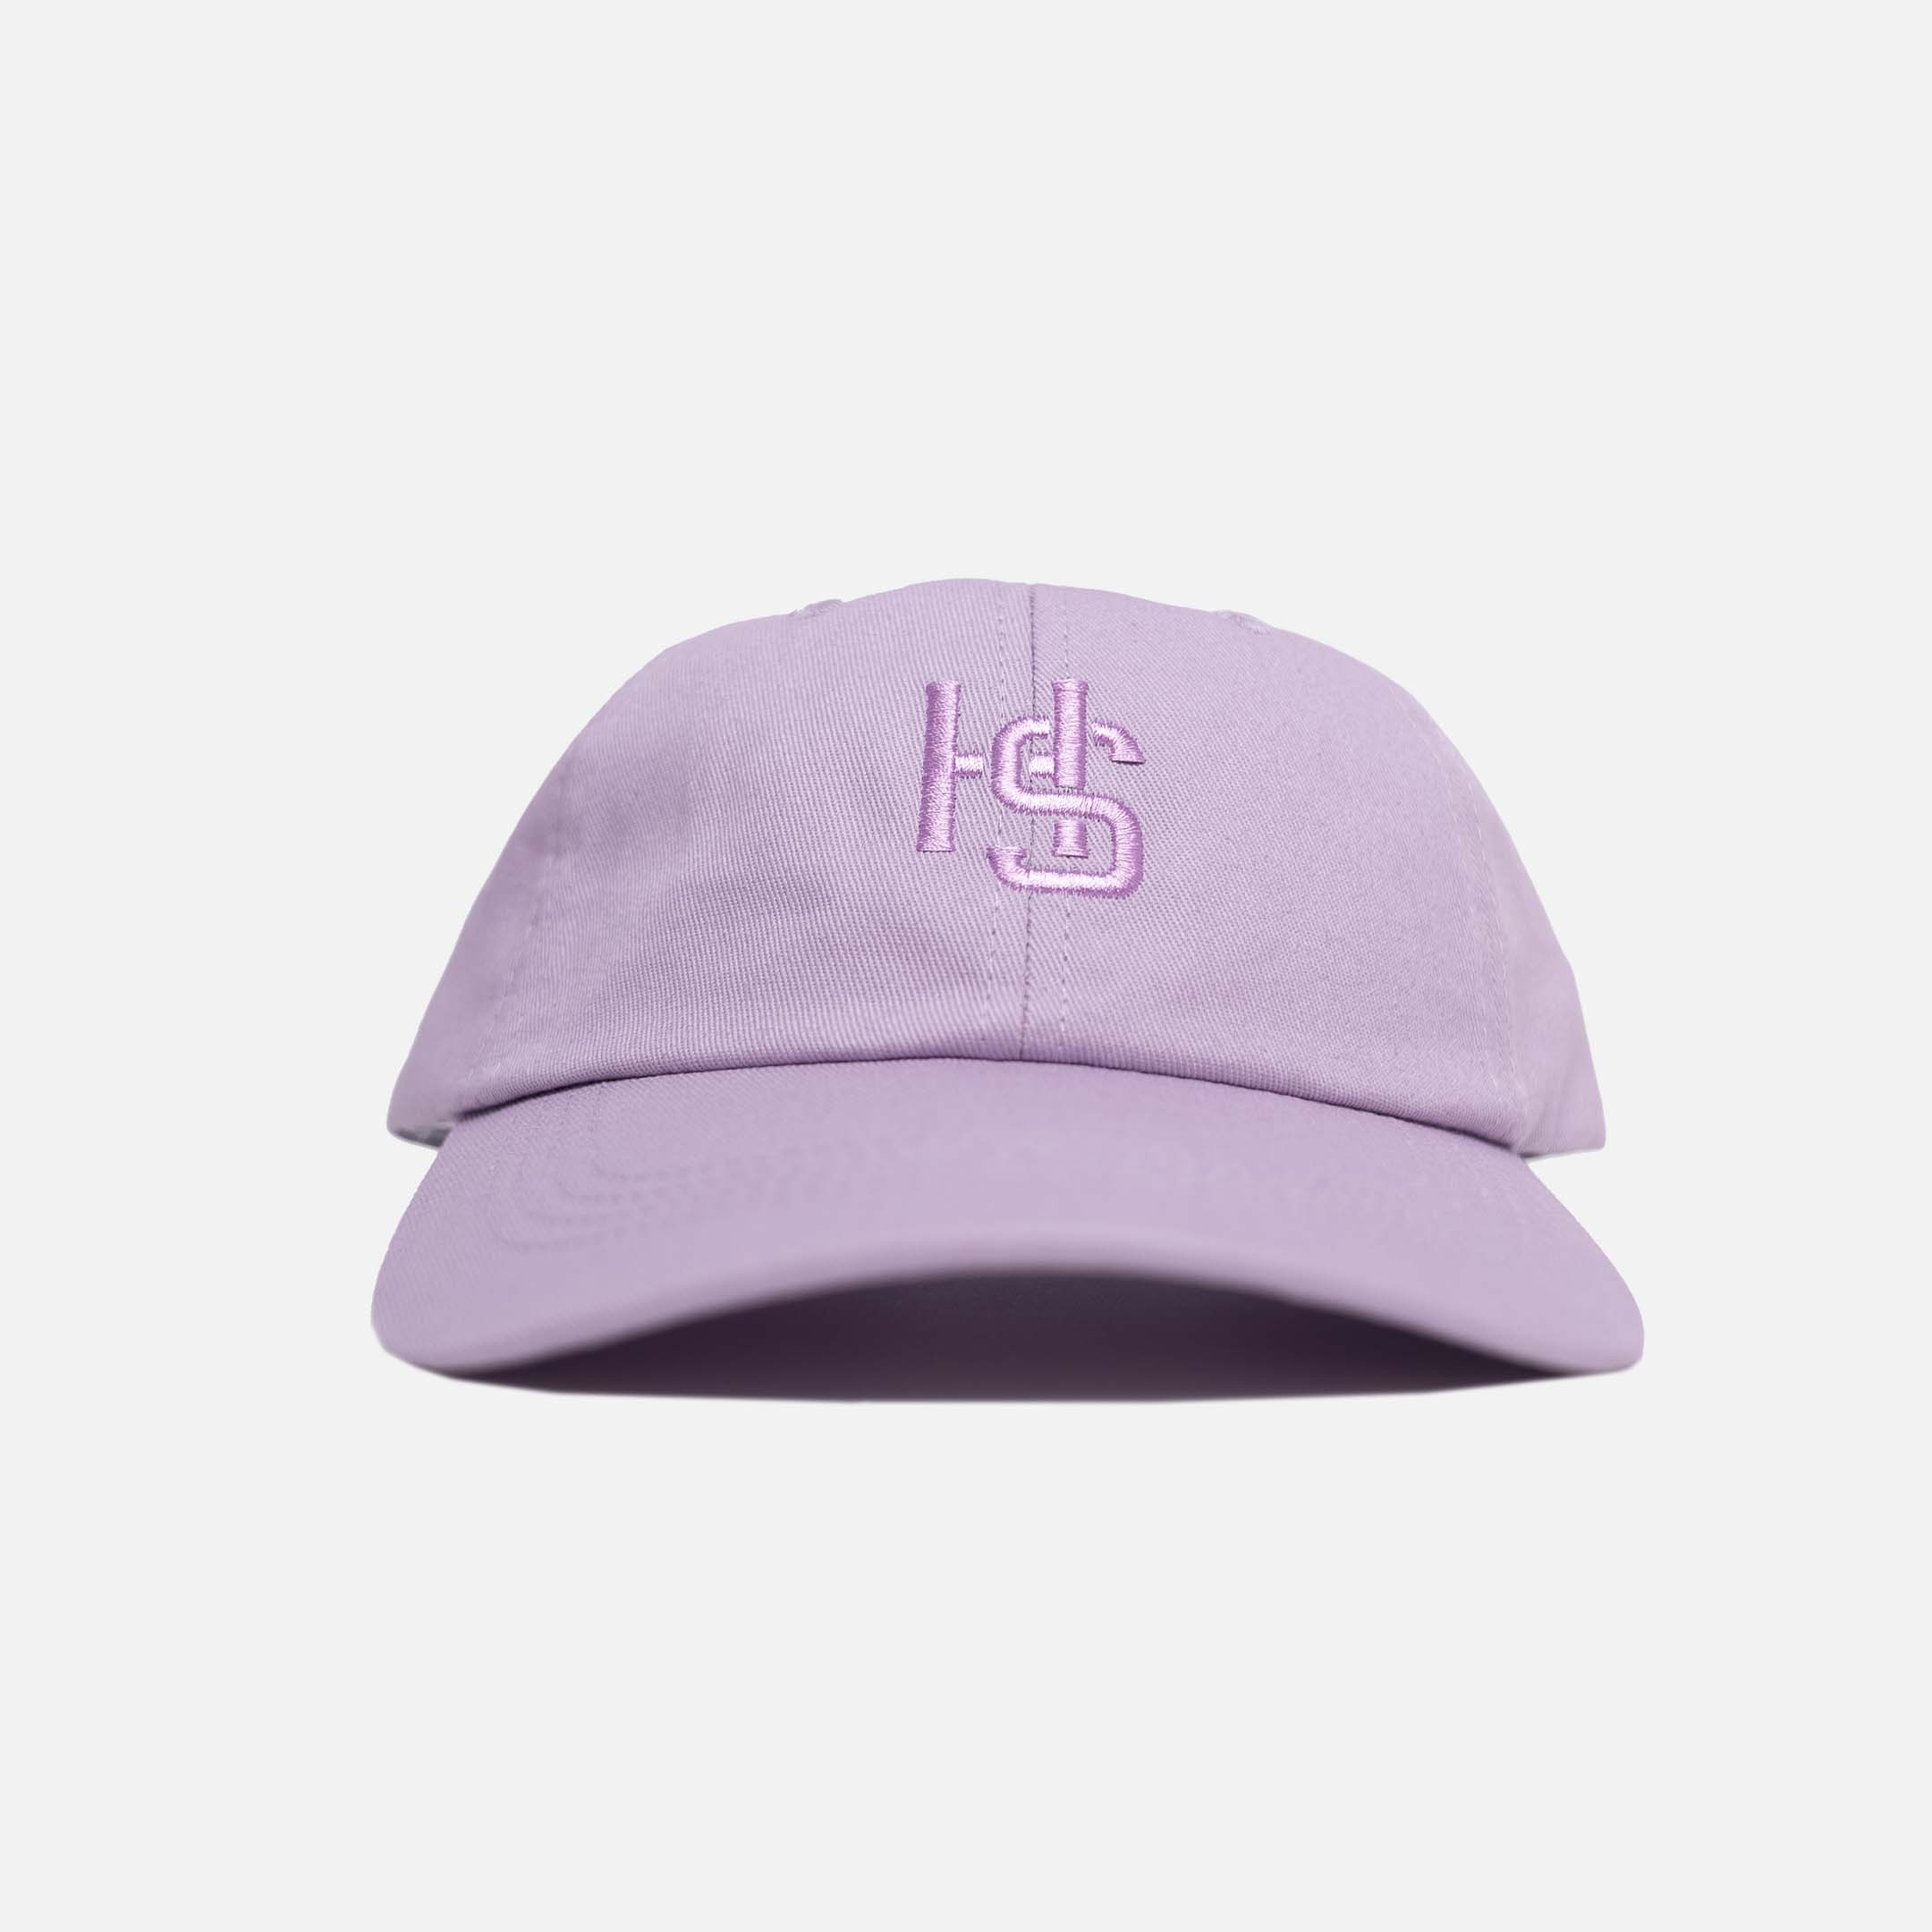 HS21 Embroidered Cap